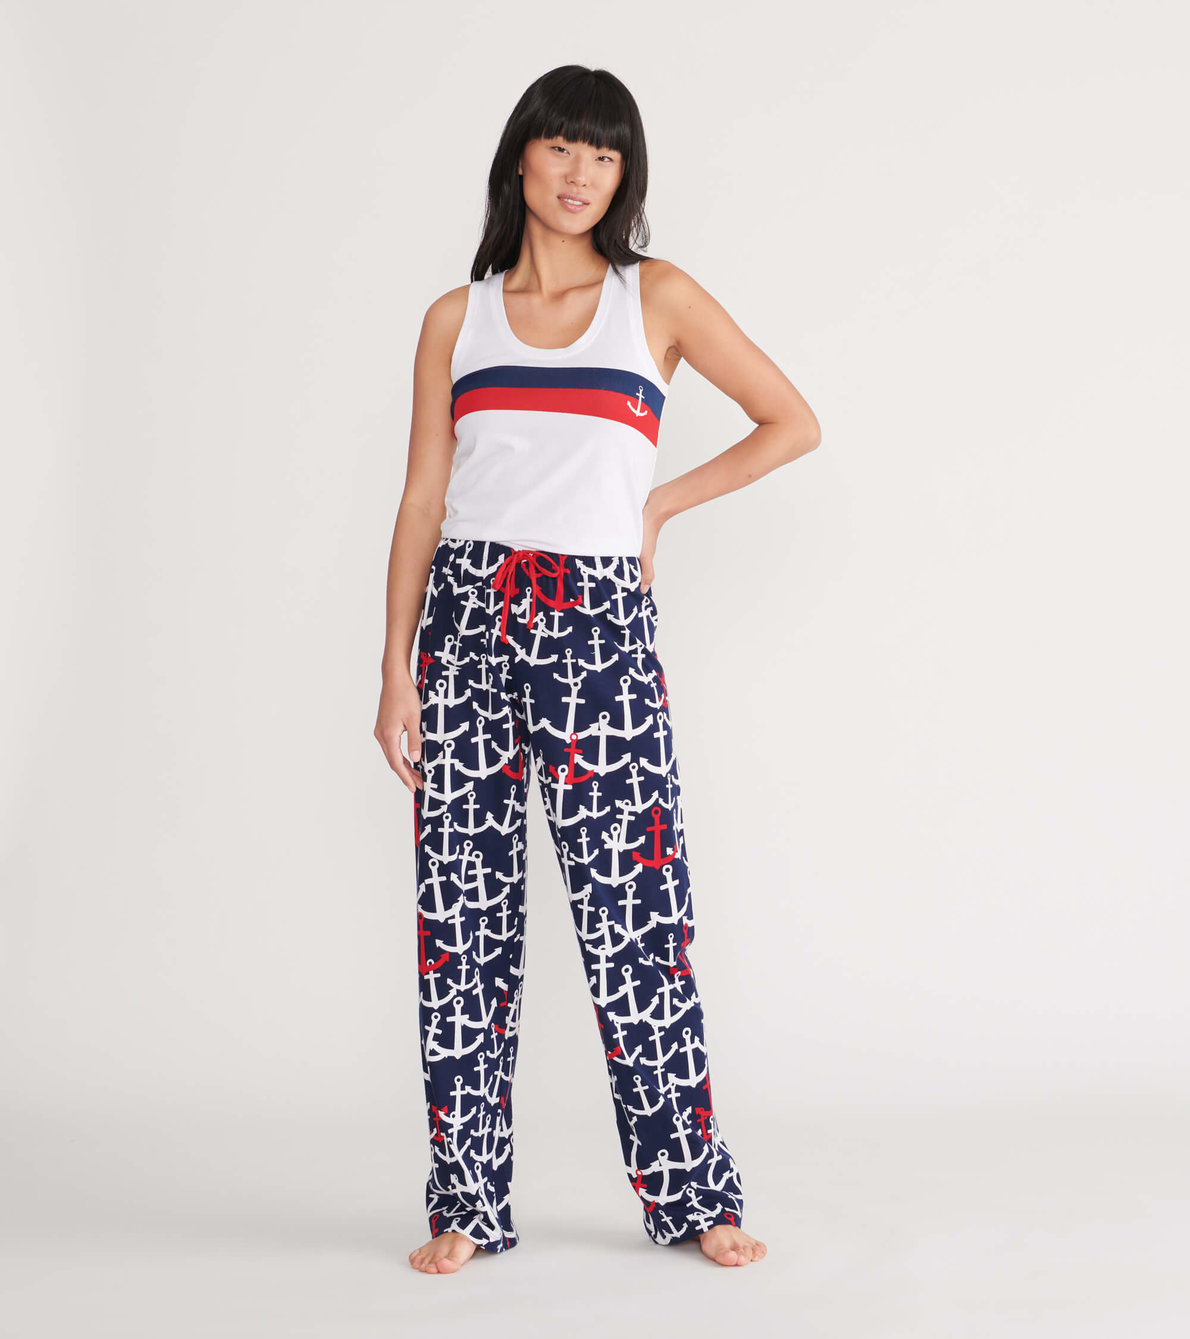 View larger image of Anchors Women's Tank and Pants Pajama Separates